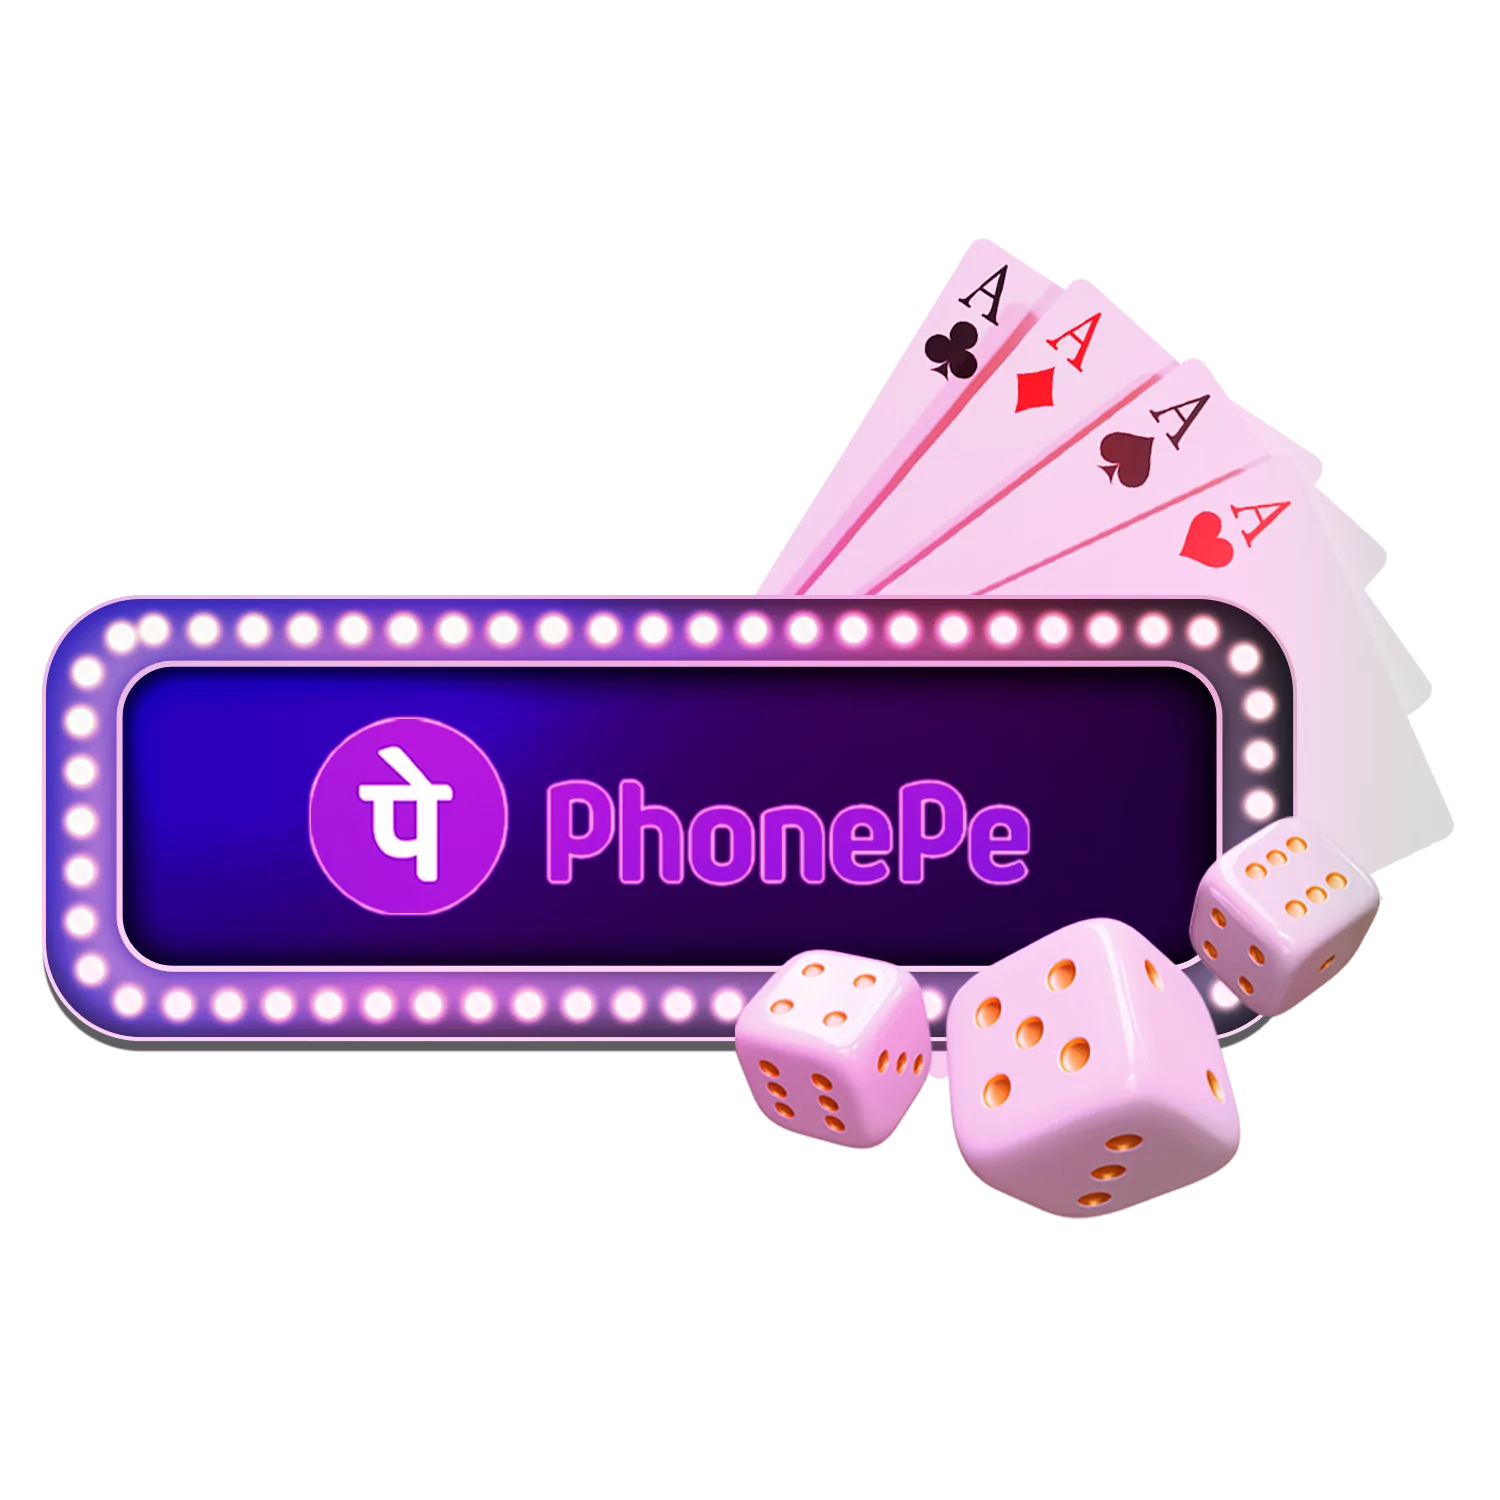 Learn from this article how to use the PhonePe account for depositing and withdrawing money from a gaming account at an online casino.